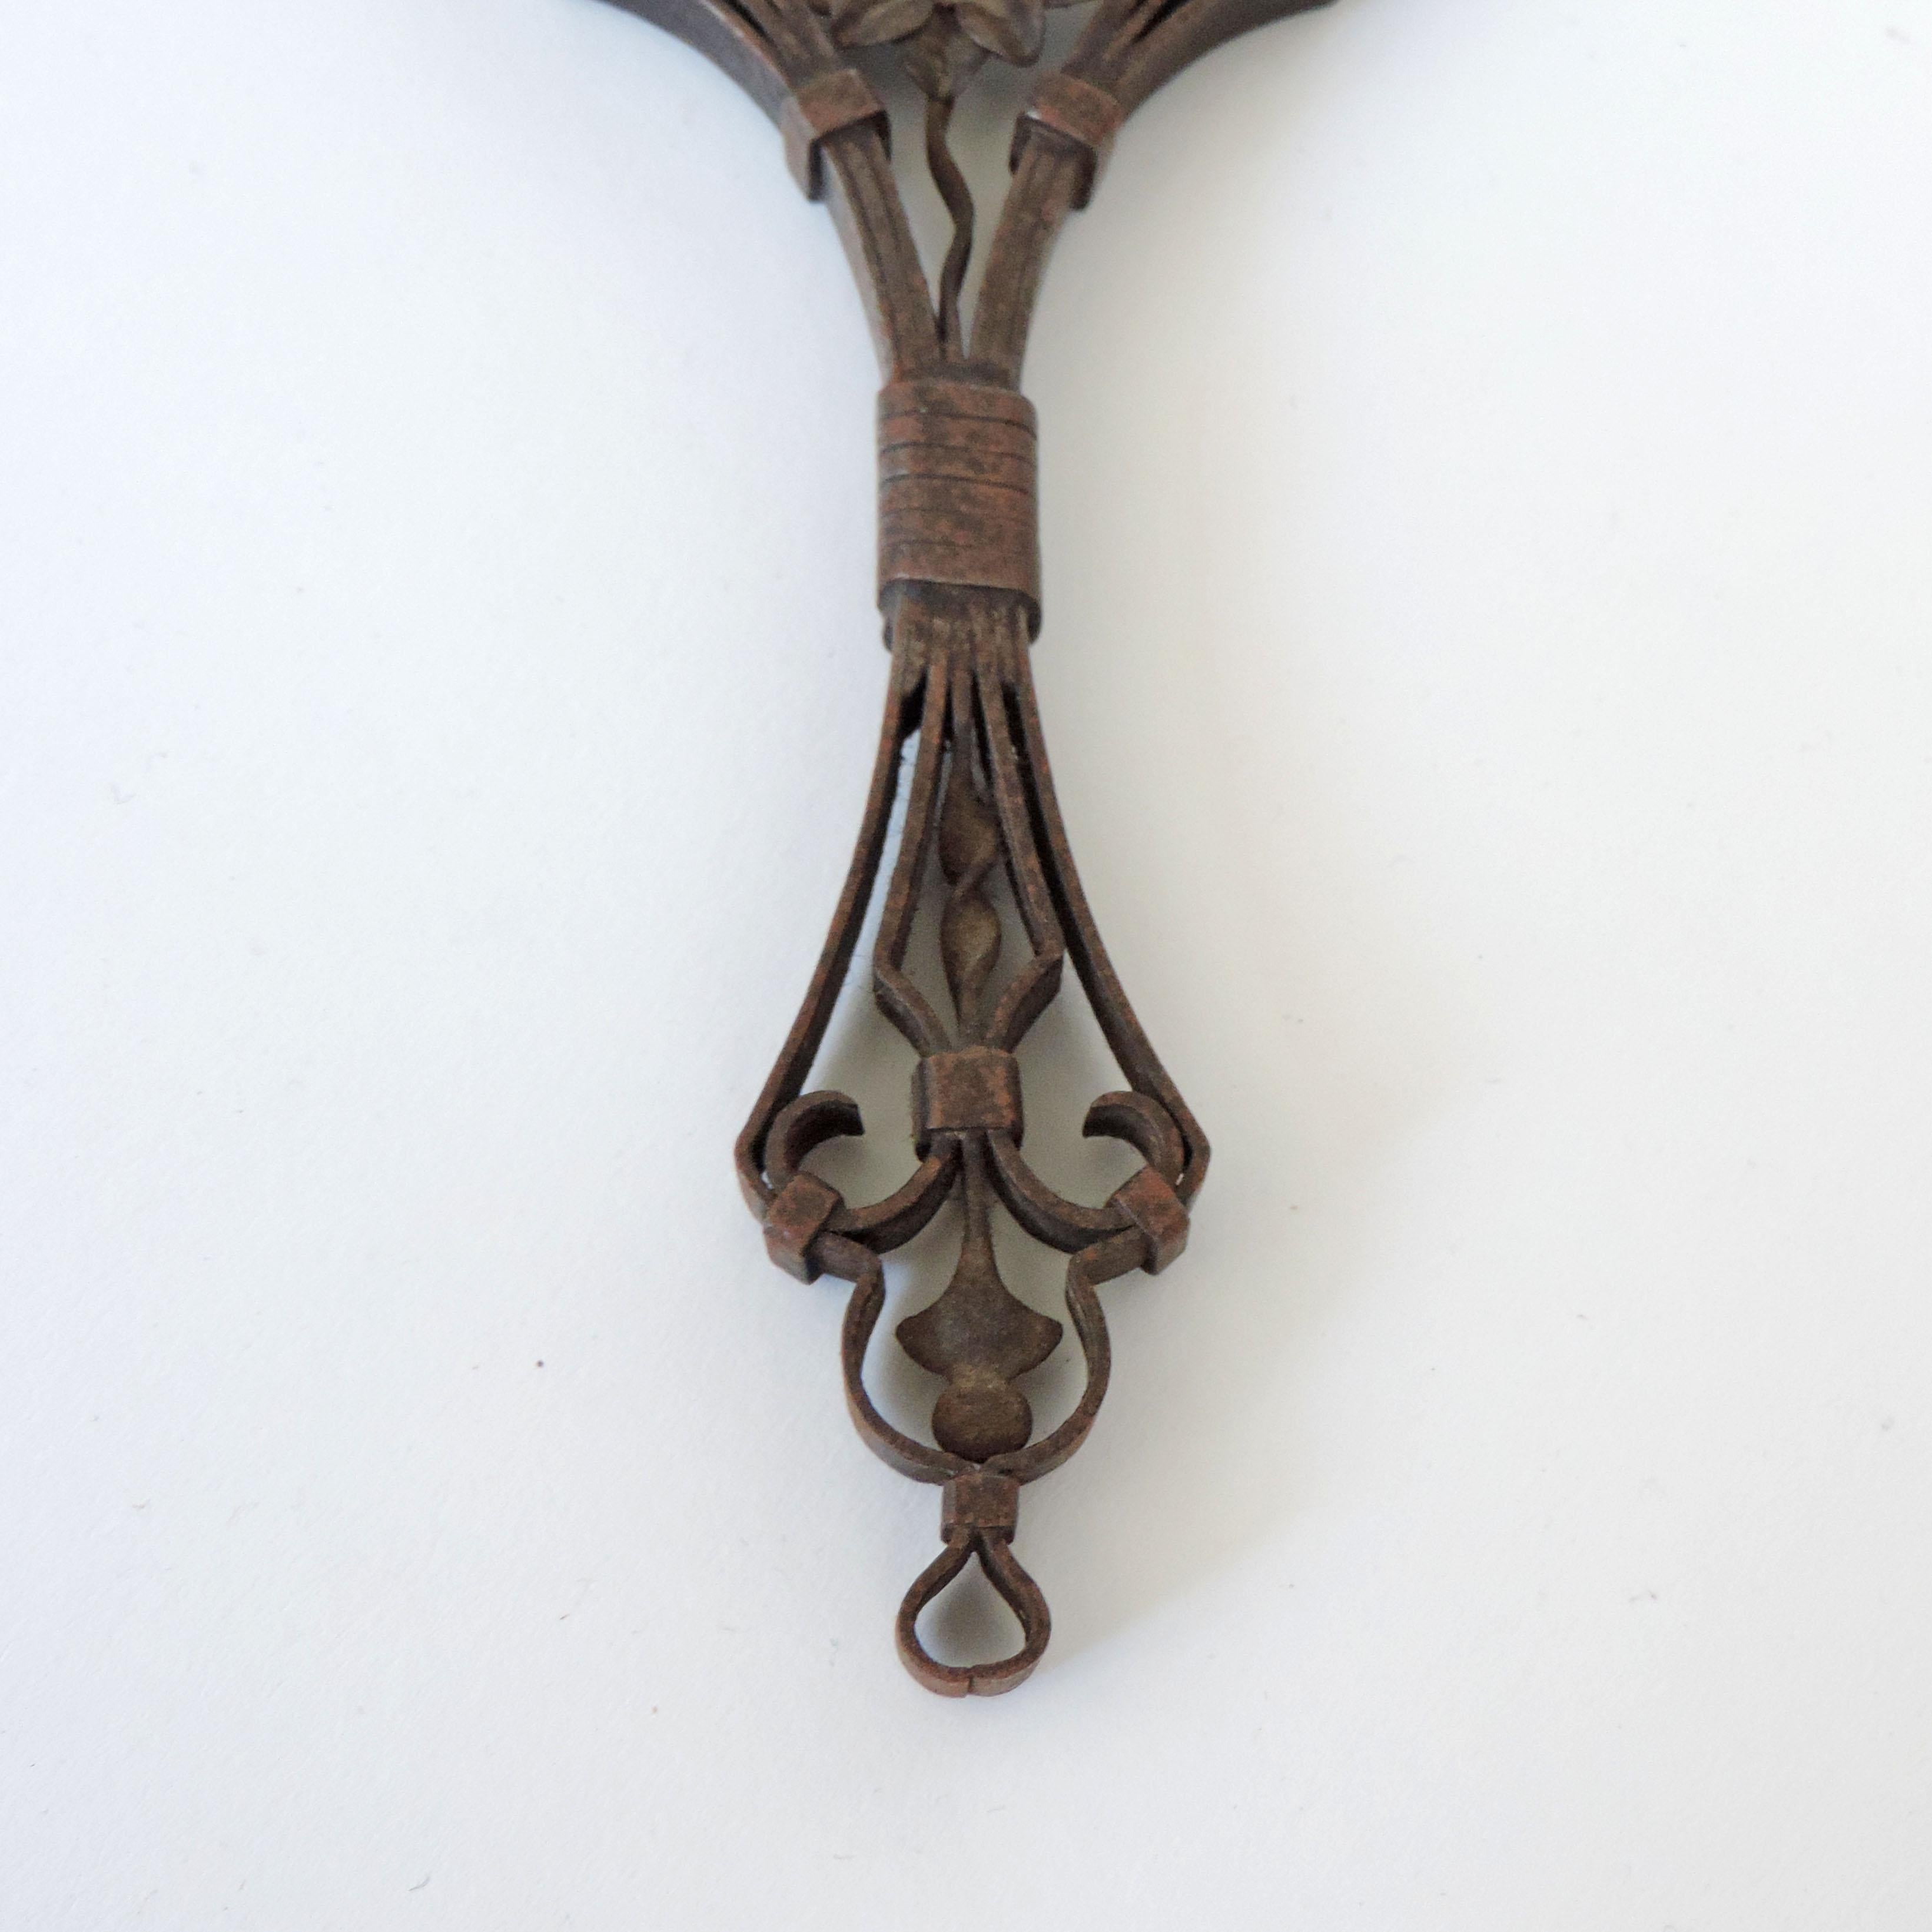 Intricate and meticulous Italian iron hand mirror, 1920s
M initial on the top of mirror.